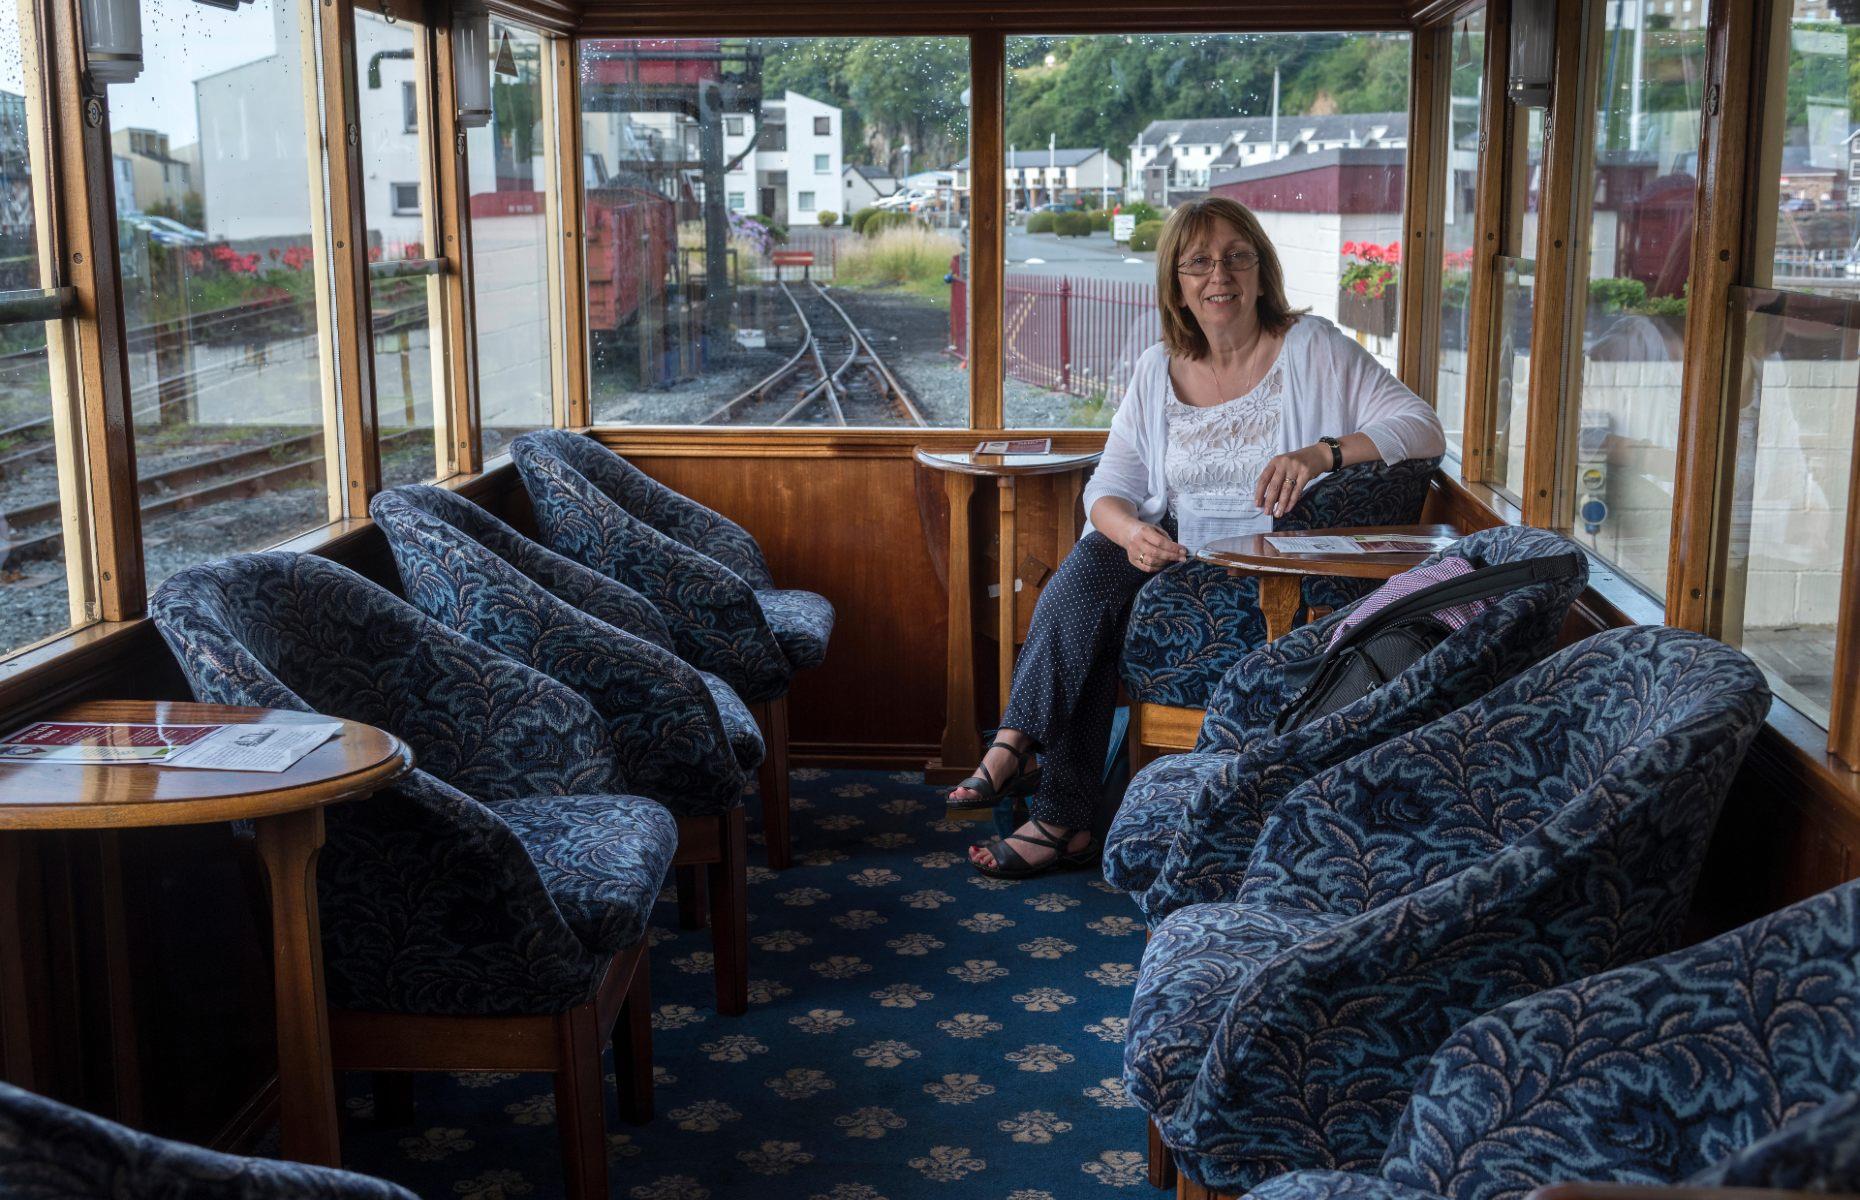 <p>Those who board the historic train will be rewarded with its gorgeous vintage interiors, complete with comfortable seats and huge windows for admiring the scenery. Tickets start at $93 for a return ticket for two adults, with a there-and-back journey taking around three hours. </p>  <p><a href="https://www.loveexploring.com/galleries/97614/incredible-images-that-capture-the-history-of-train-travel?page=1"><strong>Marvel at incredible images that capture the history of train travel</strong></a></p>